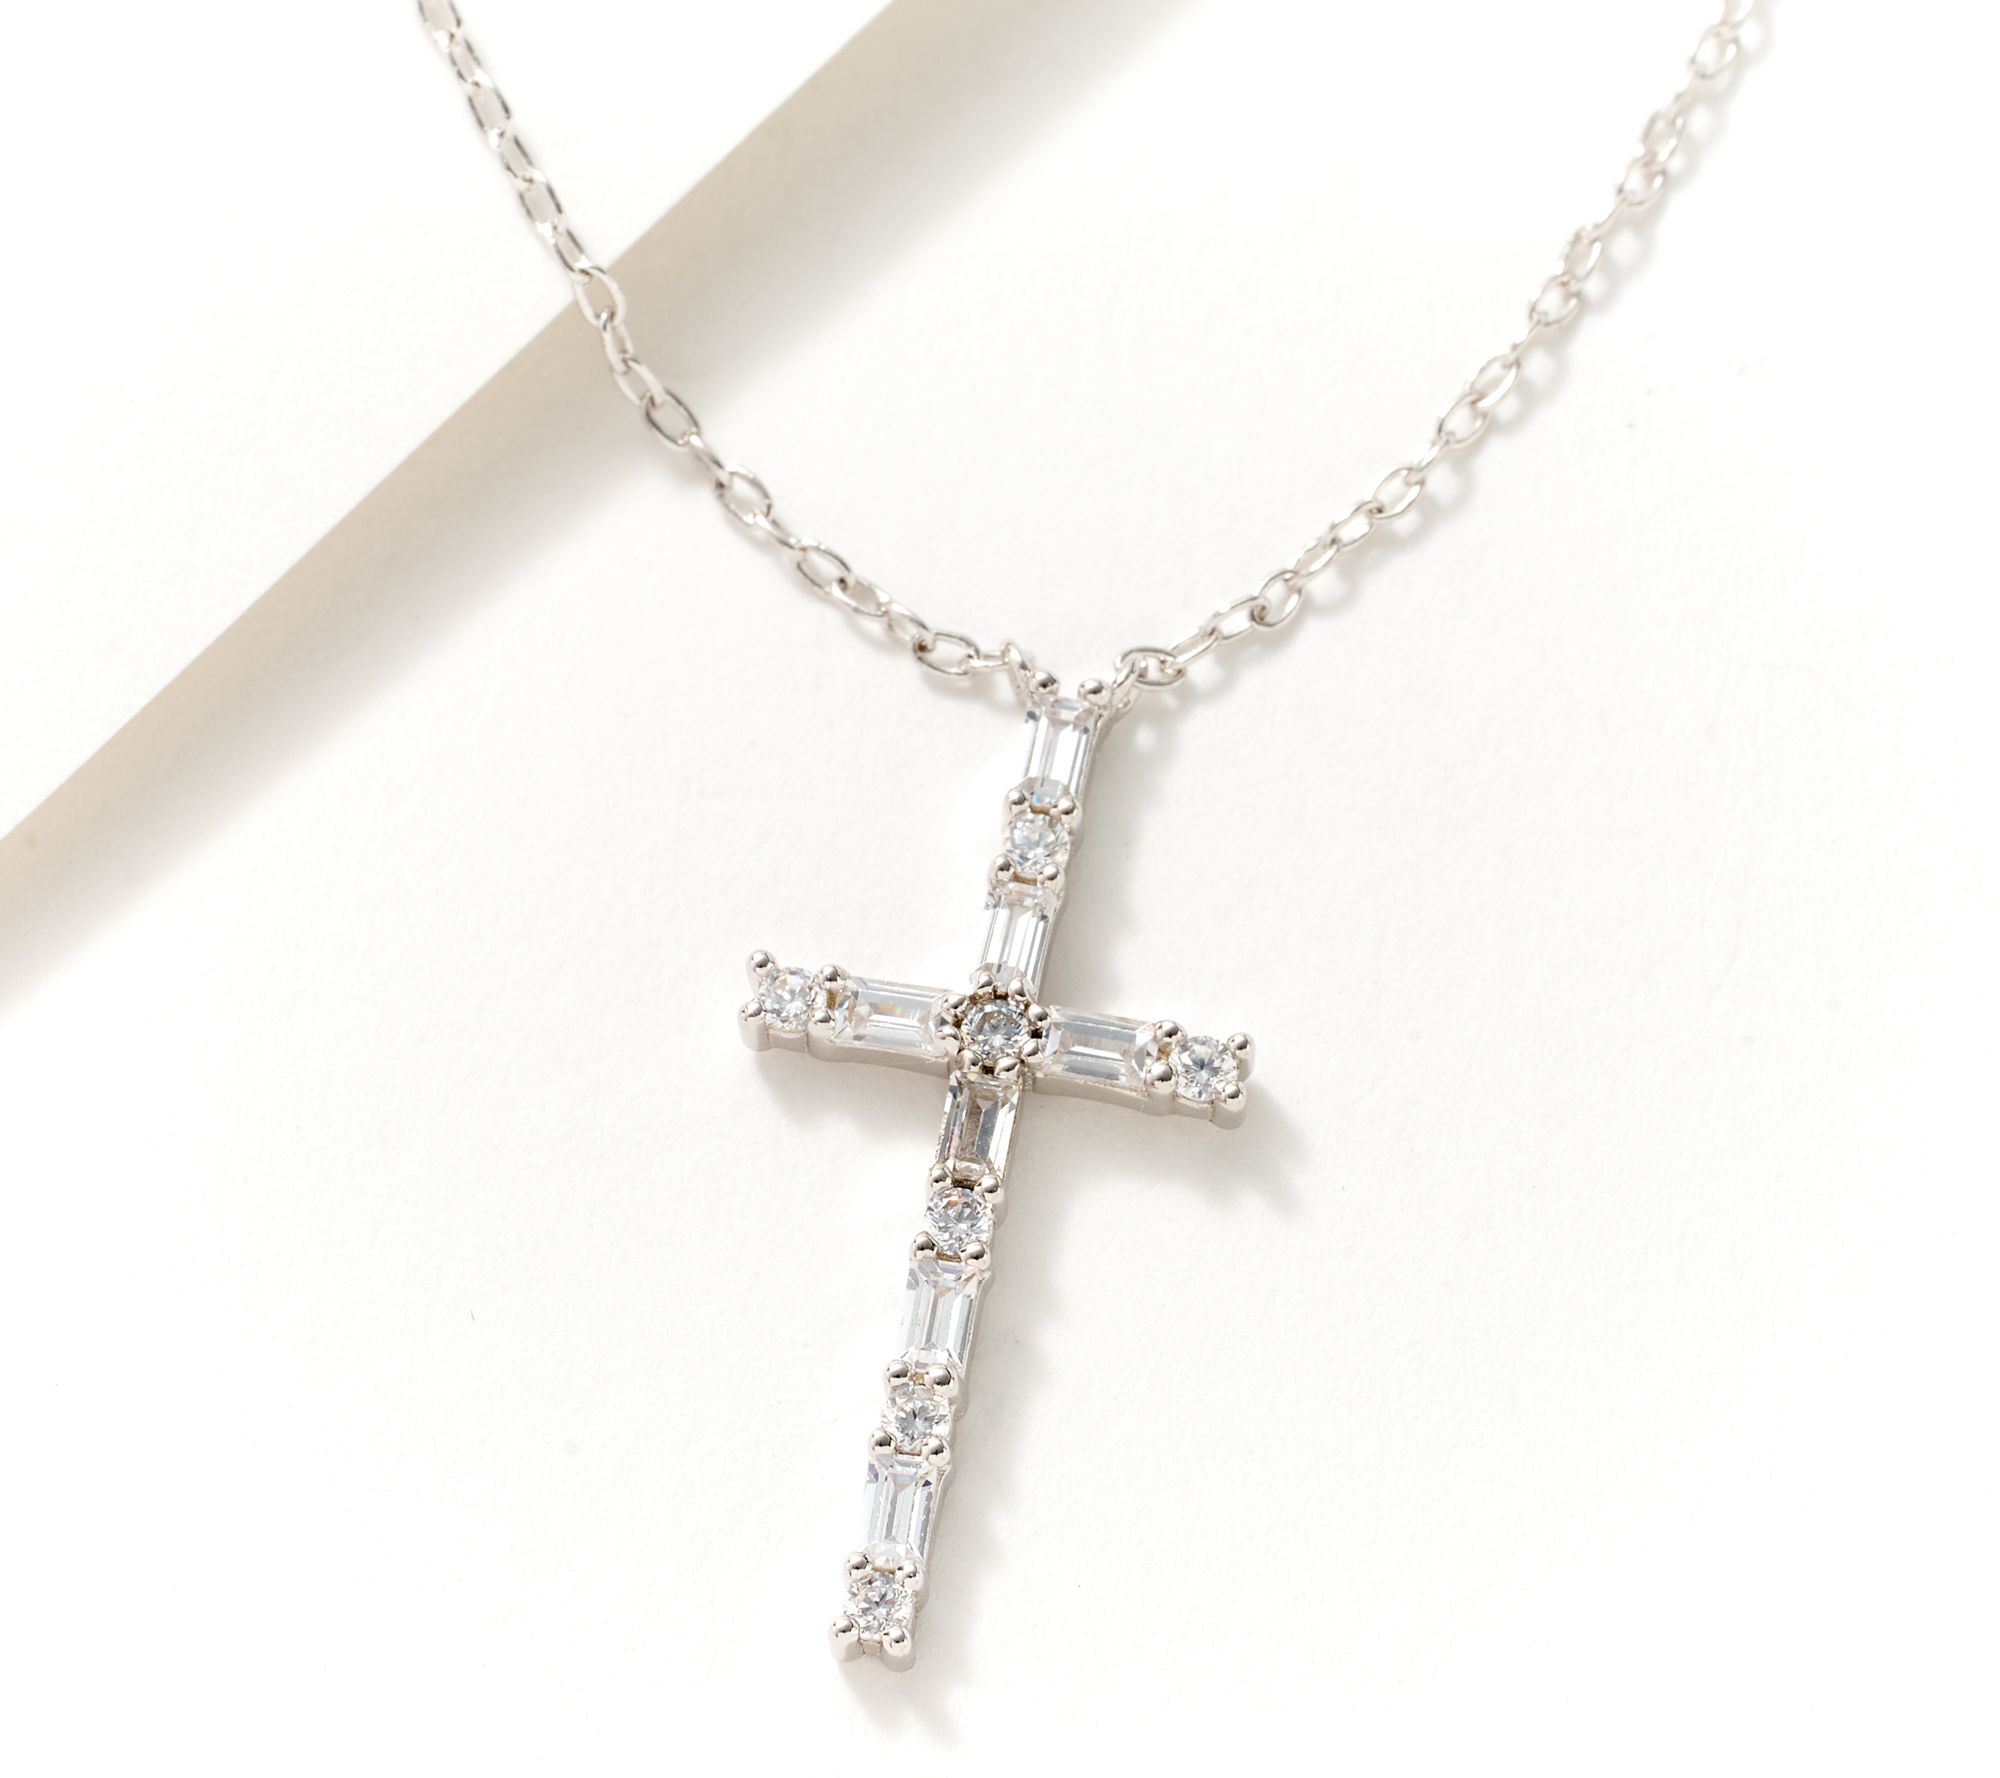 Peter Thomas Roth Signature Classic Cross Necklace